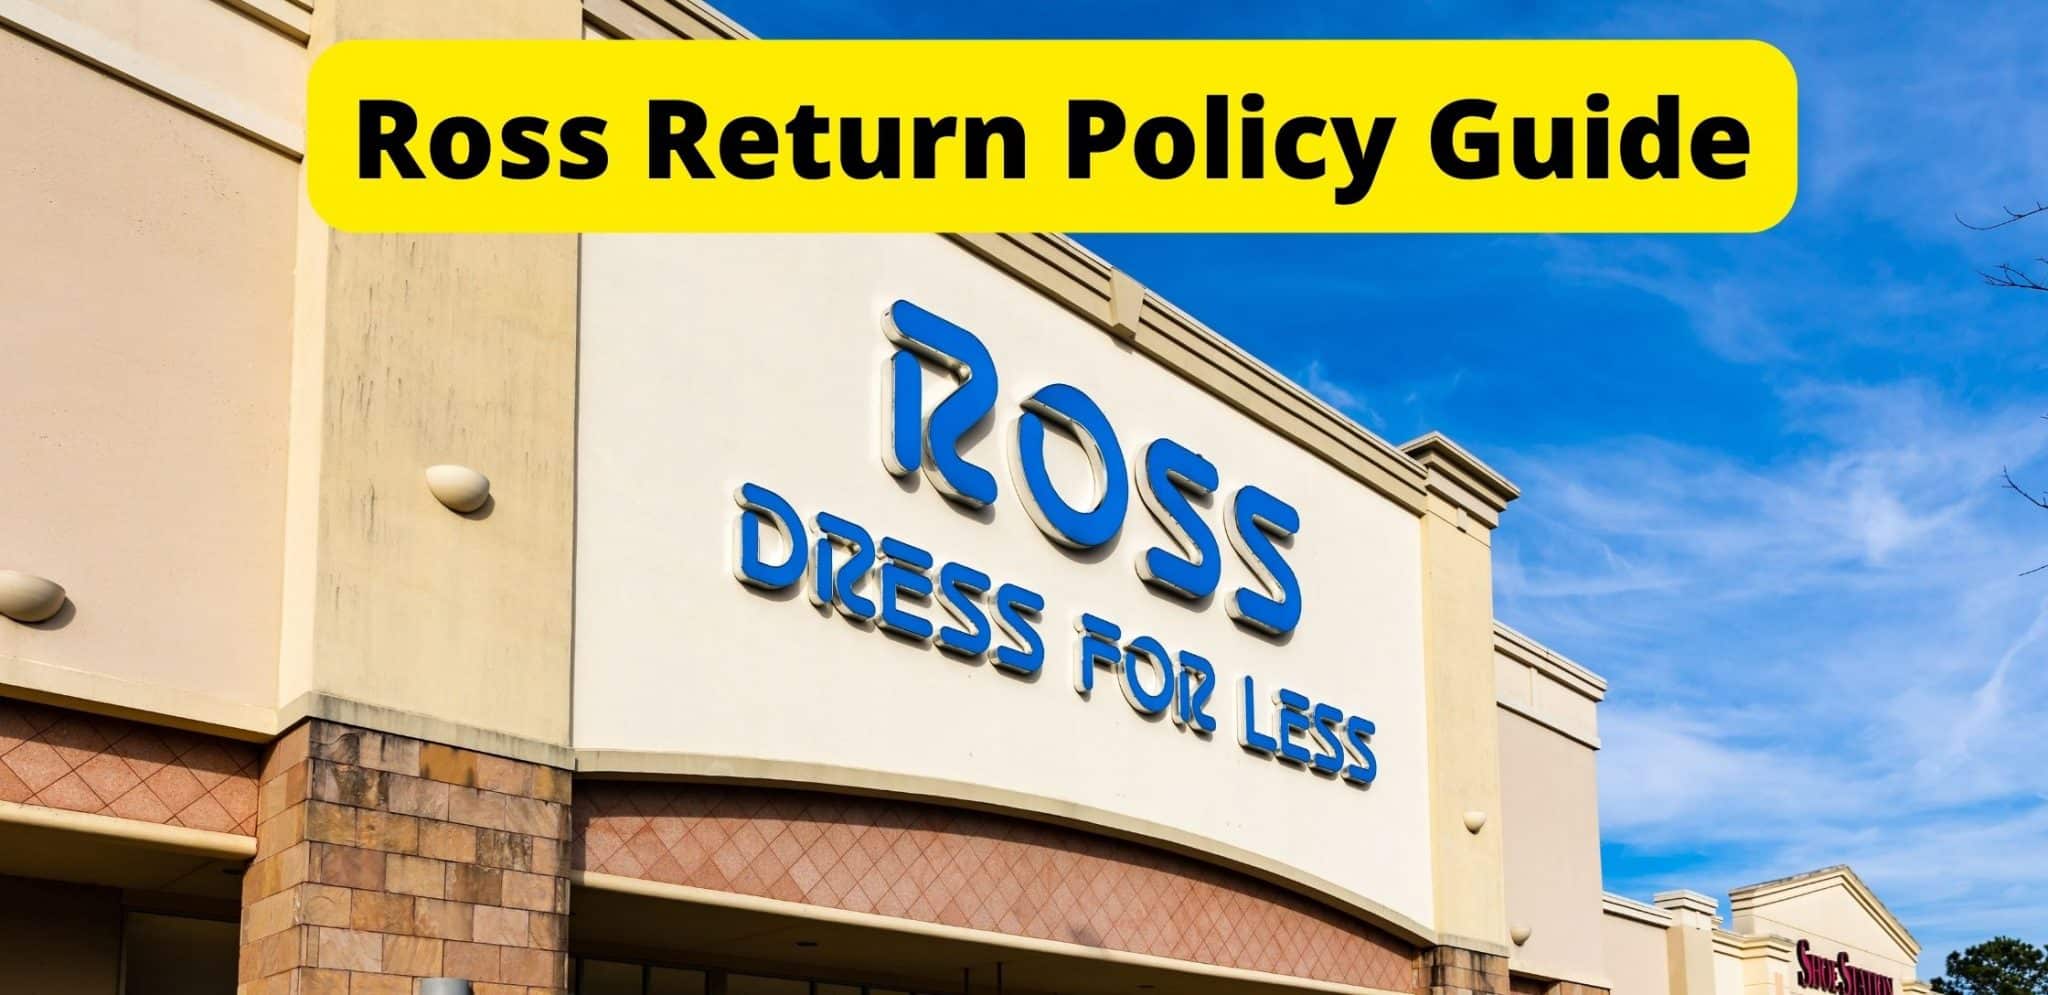 Ross Return Policy Guide